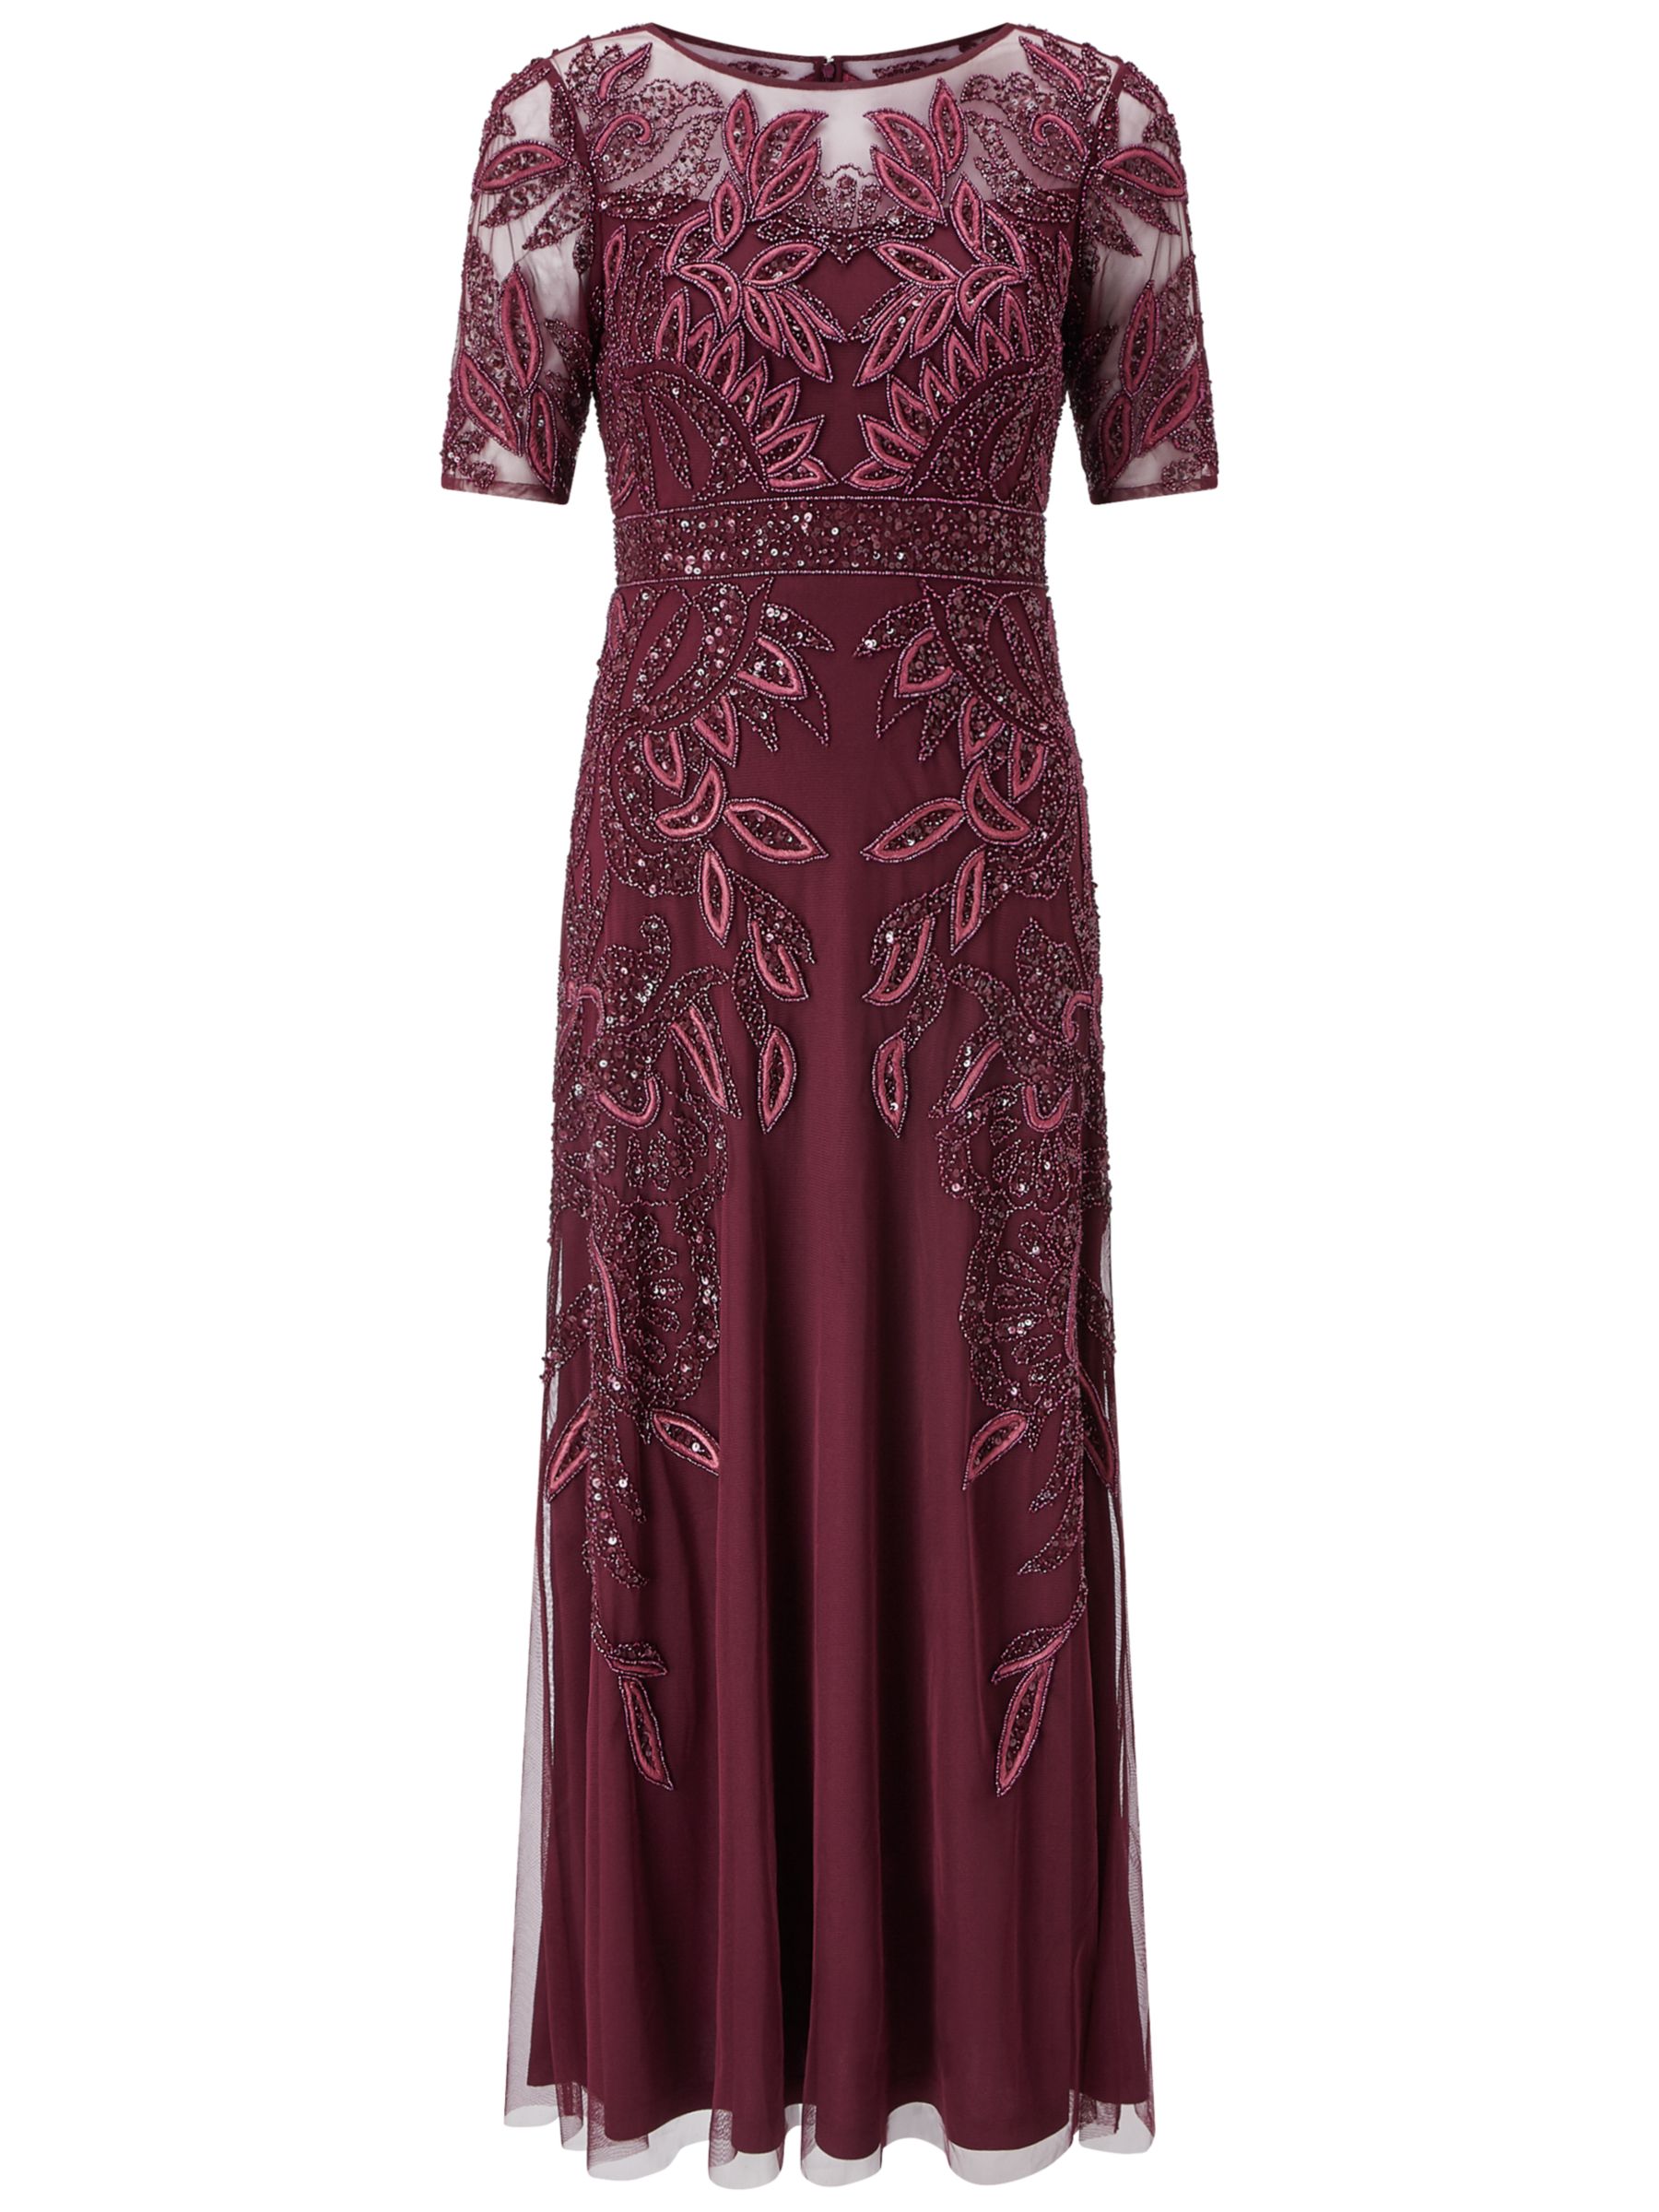 Adrianna Papell Petite Floral Beaded Long Gown, Cabernet